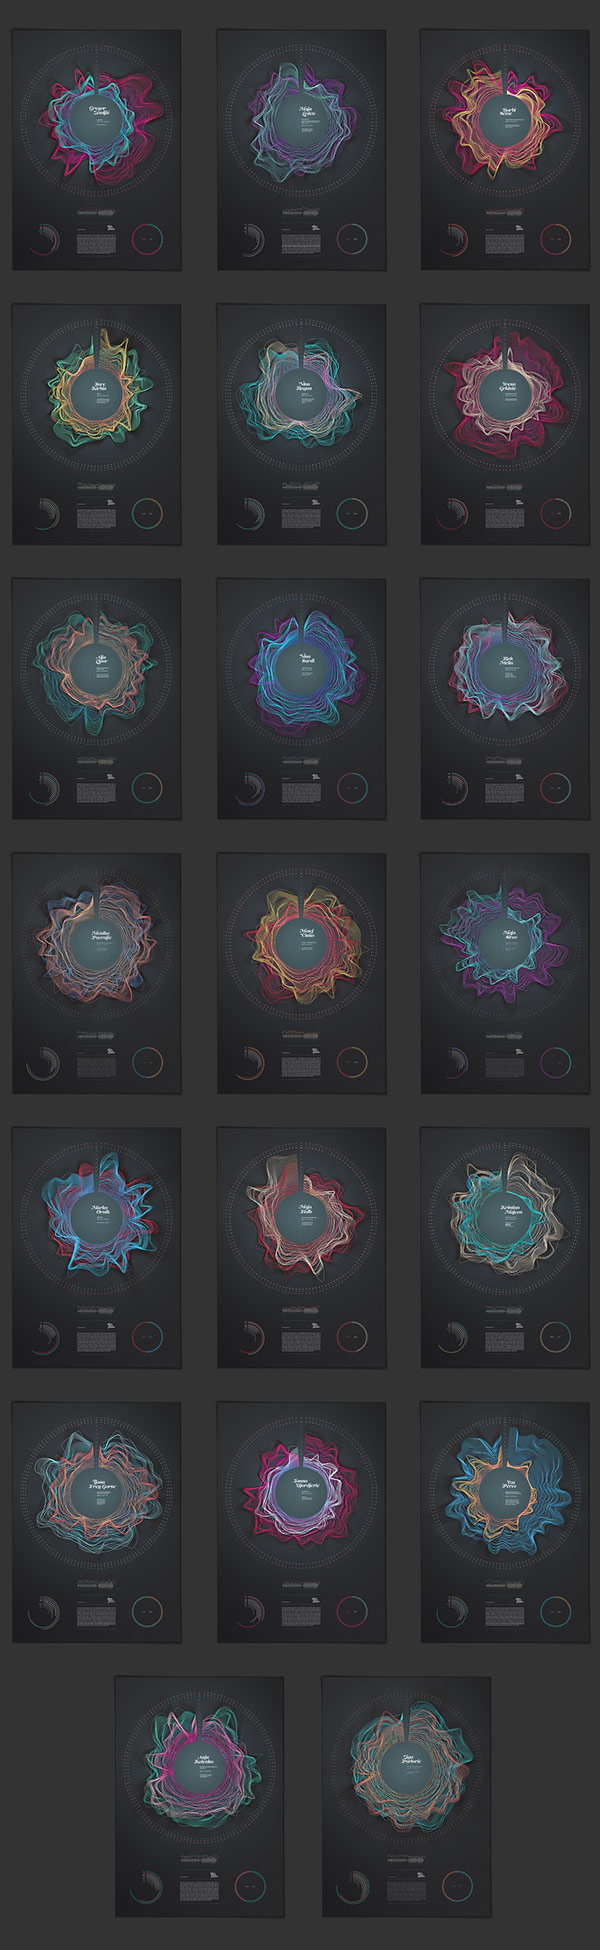 A set of posters based on stylish infographics created for the Braindance neuro-art project.